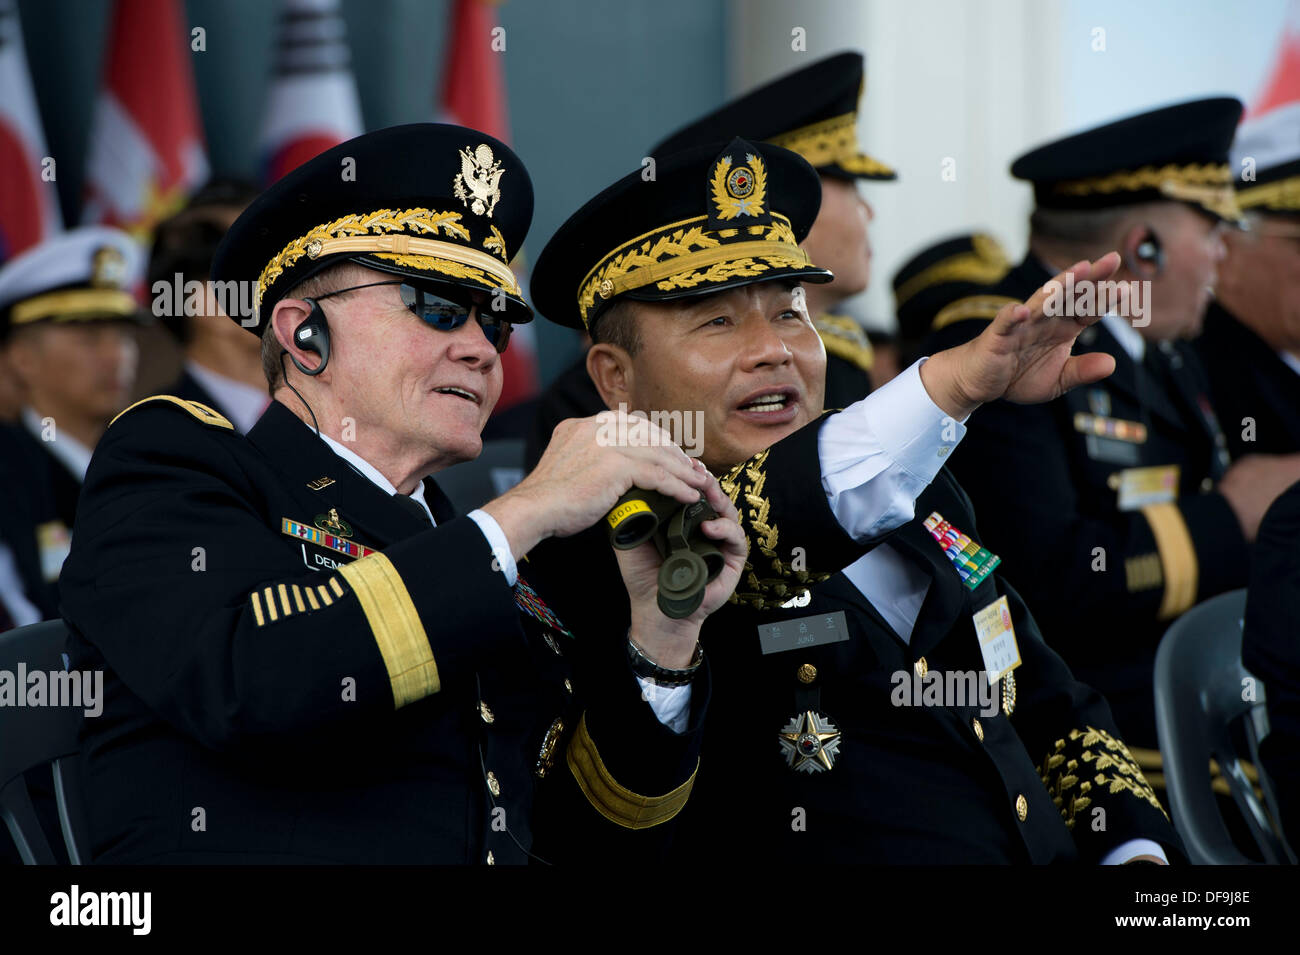 US Chairman of the Joint Chiefs General Martin Dempsey stands with South Korea General Jung Seung-jo during the ROK Armed Forces Parade October 1, 2013 in Seoul, Republic of Korea. The military parade commemorates the anniversary of the ROK-U.S. Alliance. Stock Photo